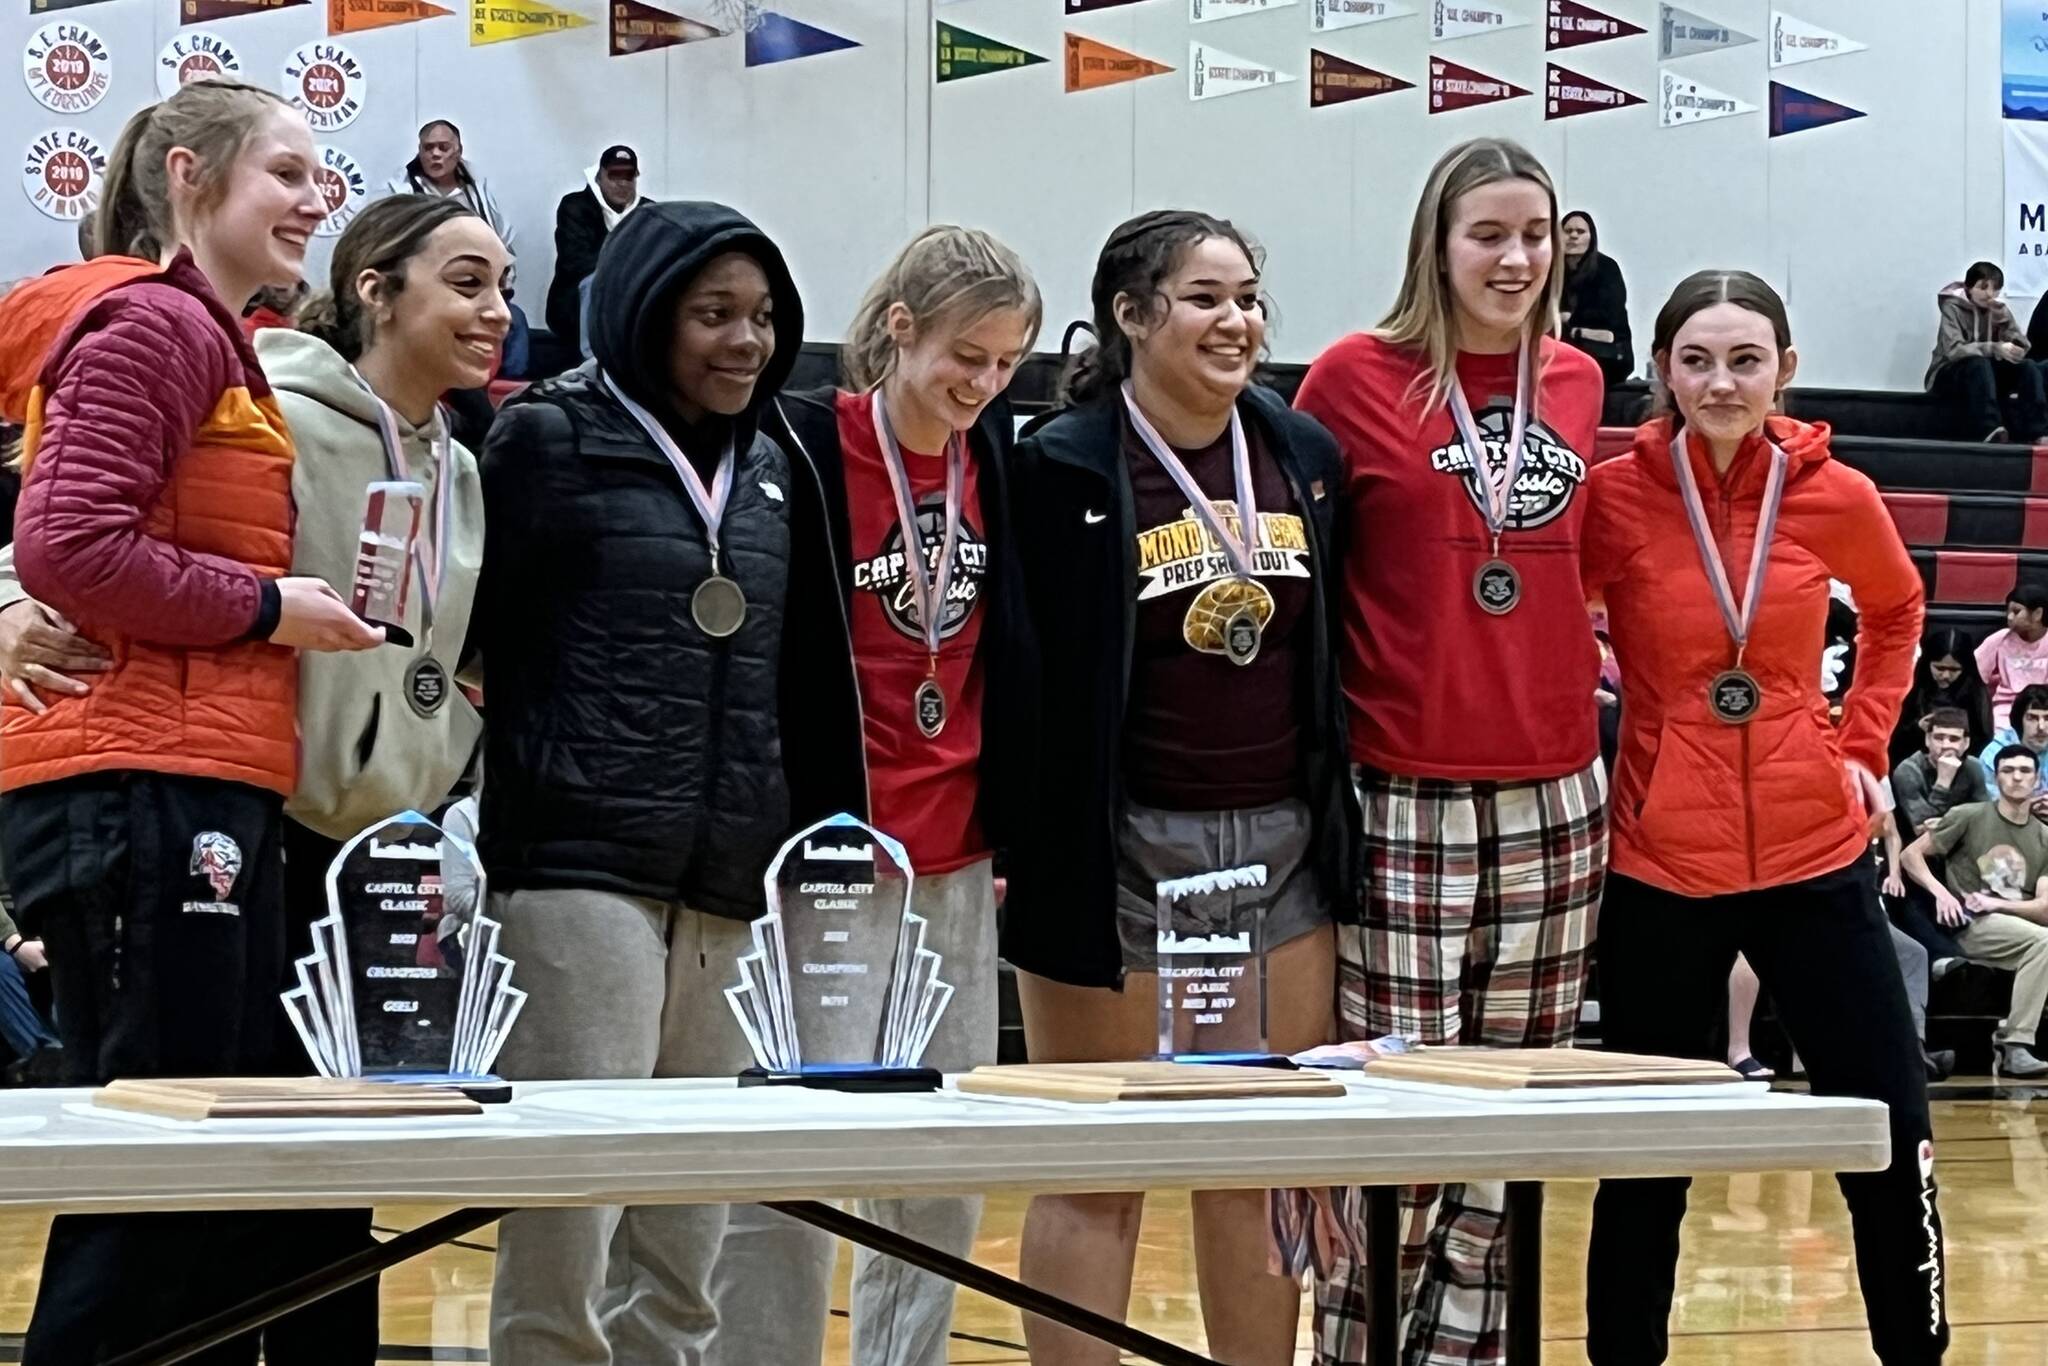 JDHS players Skylar Tuckwood, Mila Hargrave and Gwen Nizich each earned all-tournament honors for the Crimson Bears during the Capital City Classic awards ceremony. (Jonson Kuhn / Juneau Empire)